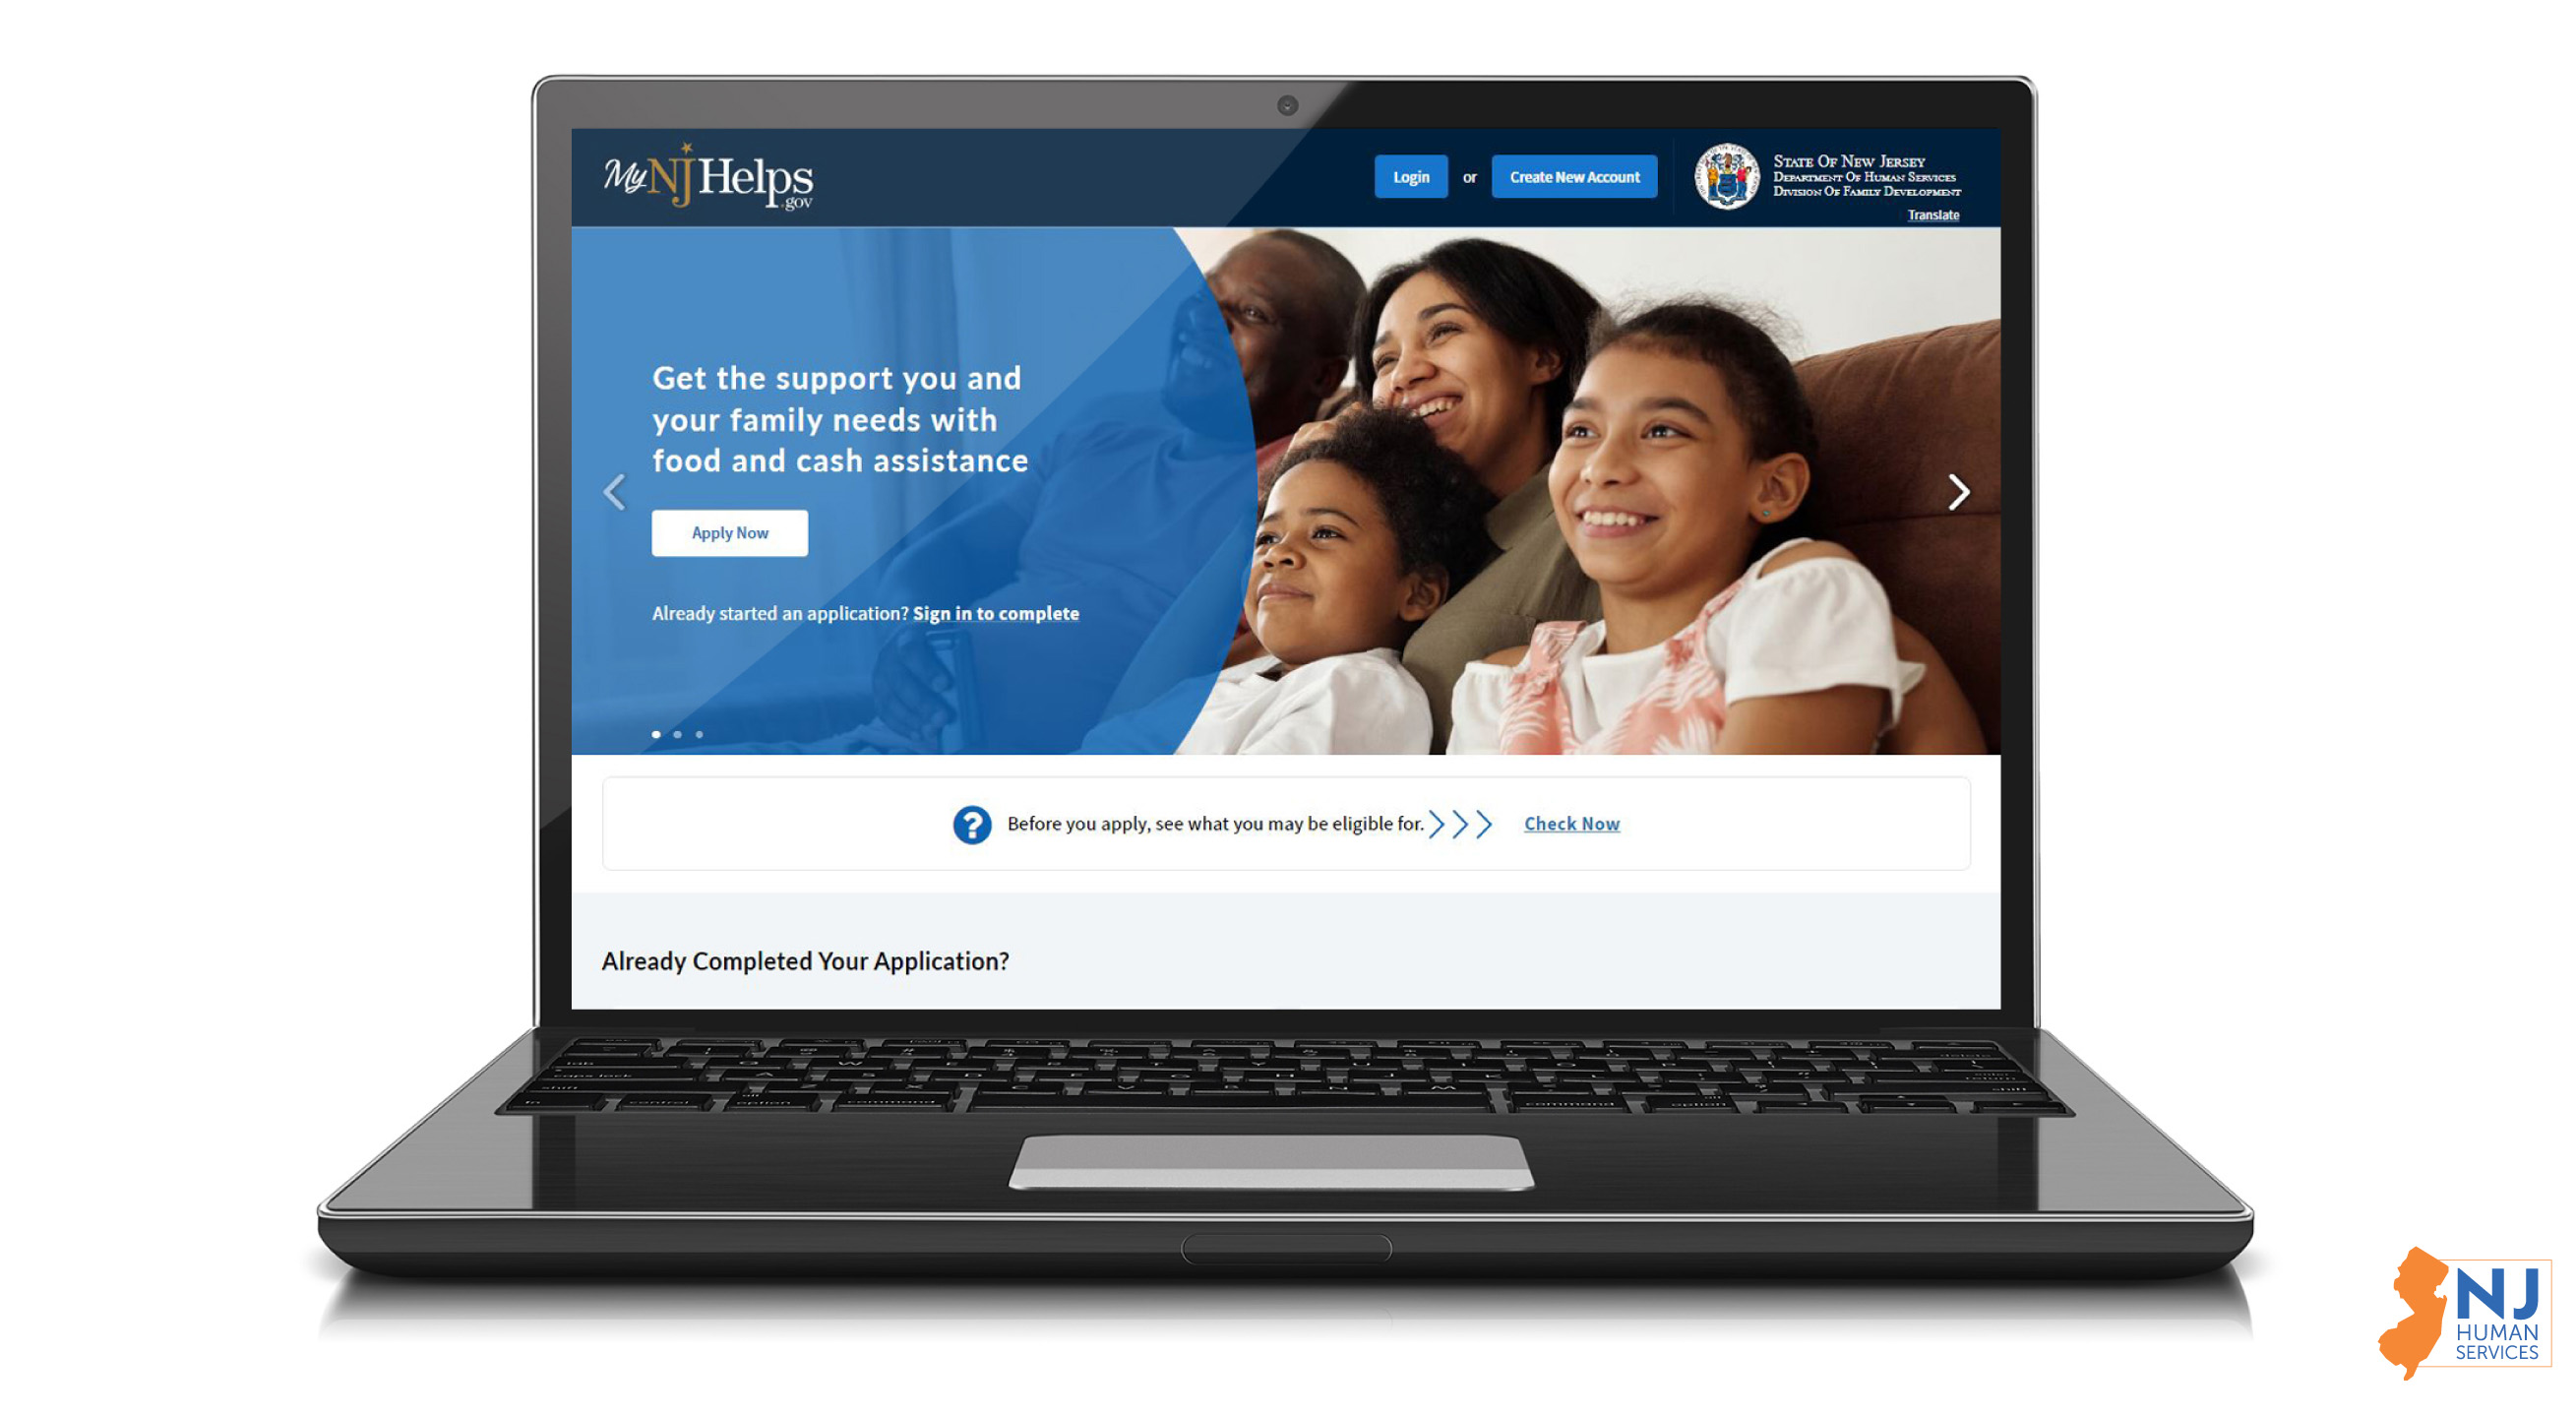 DHS Launches Redesigned NJ Helps Portal and Online Application for Food & Cash Assistance. 